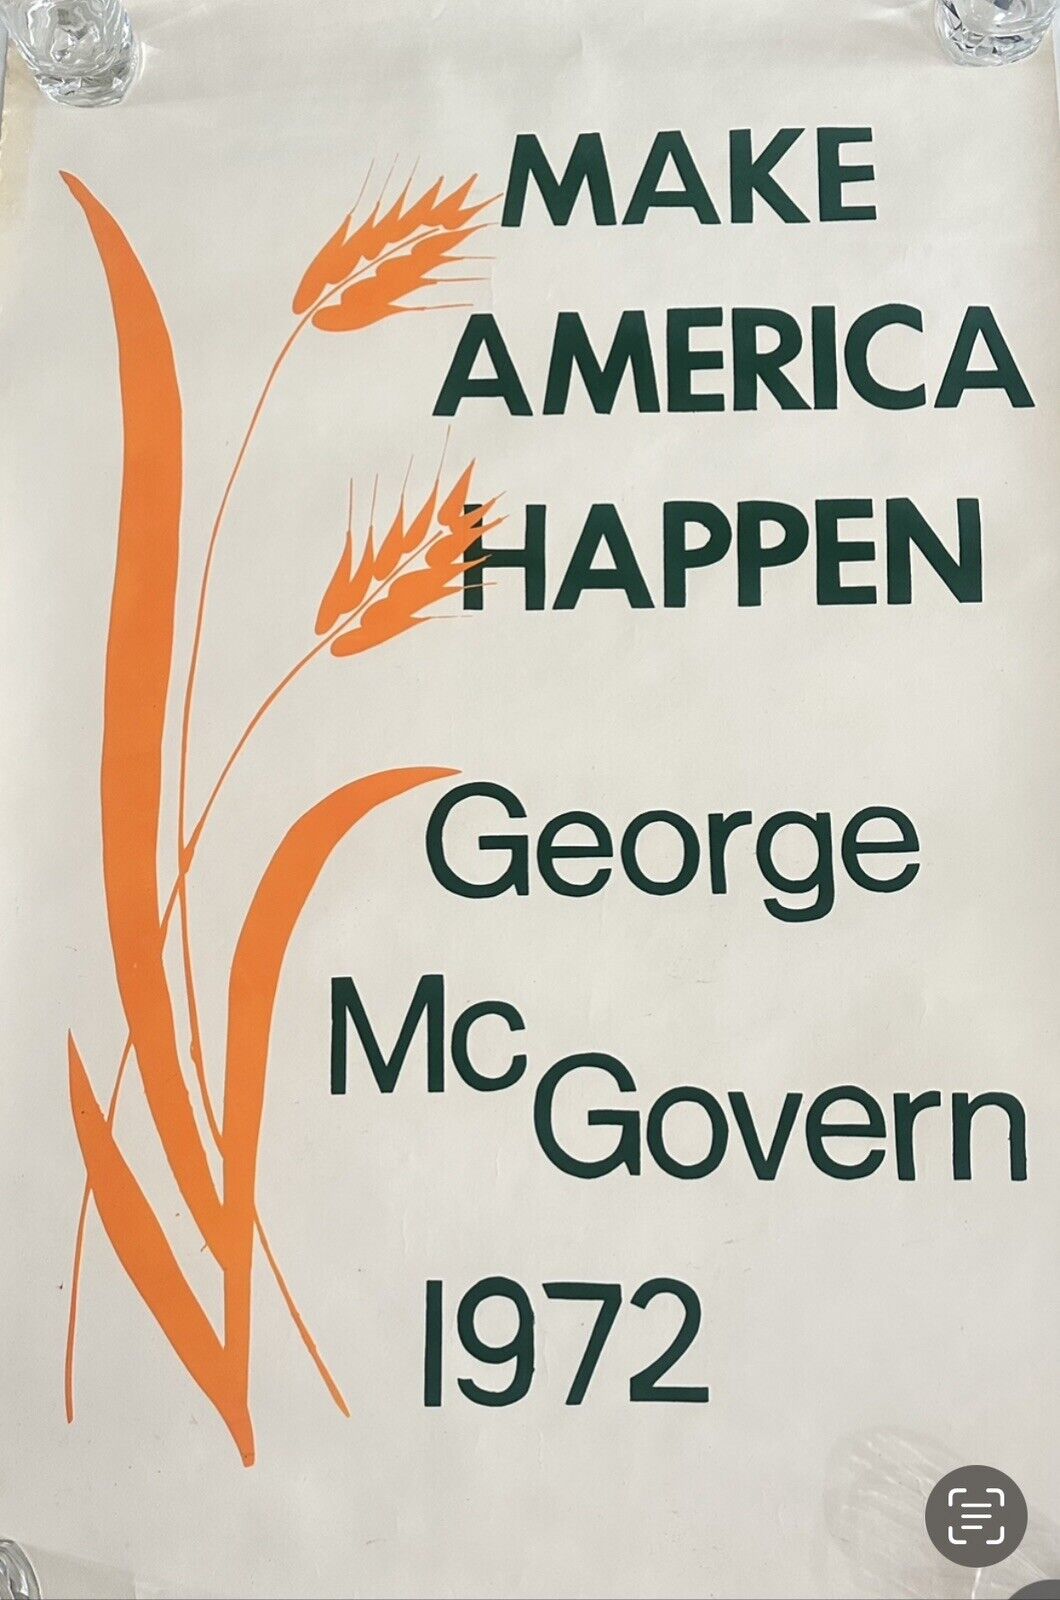 Make America Happen George McGovern (D) 1972 Political Poster Ran for President